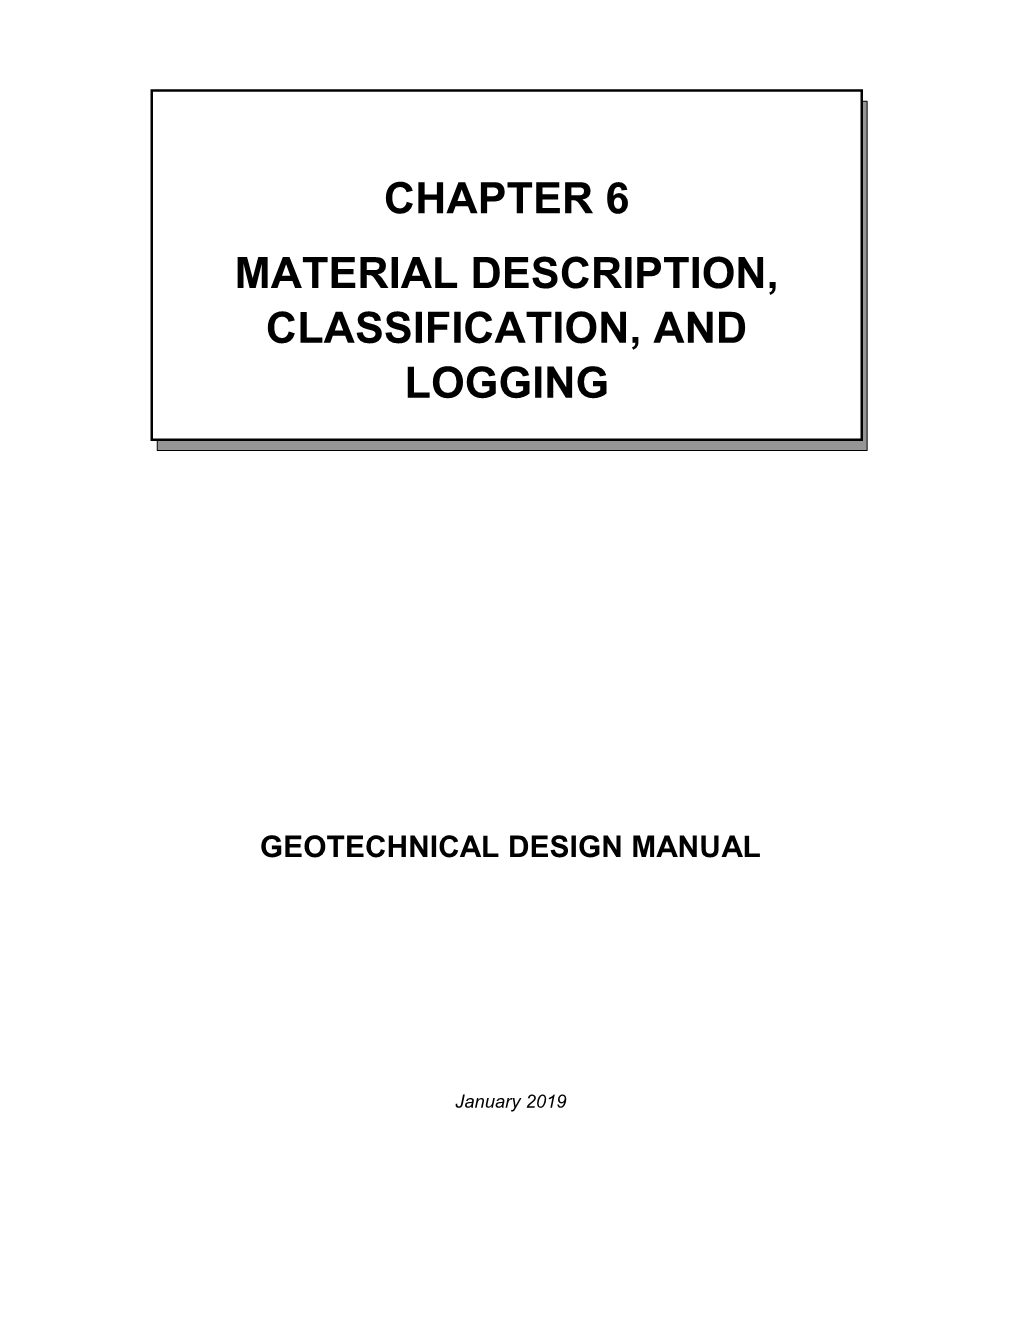 Chapter 6 – Material Description, Classification, and Logging